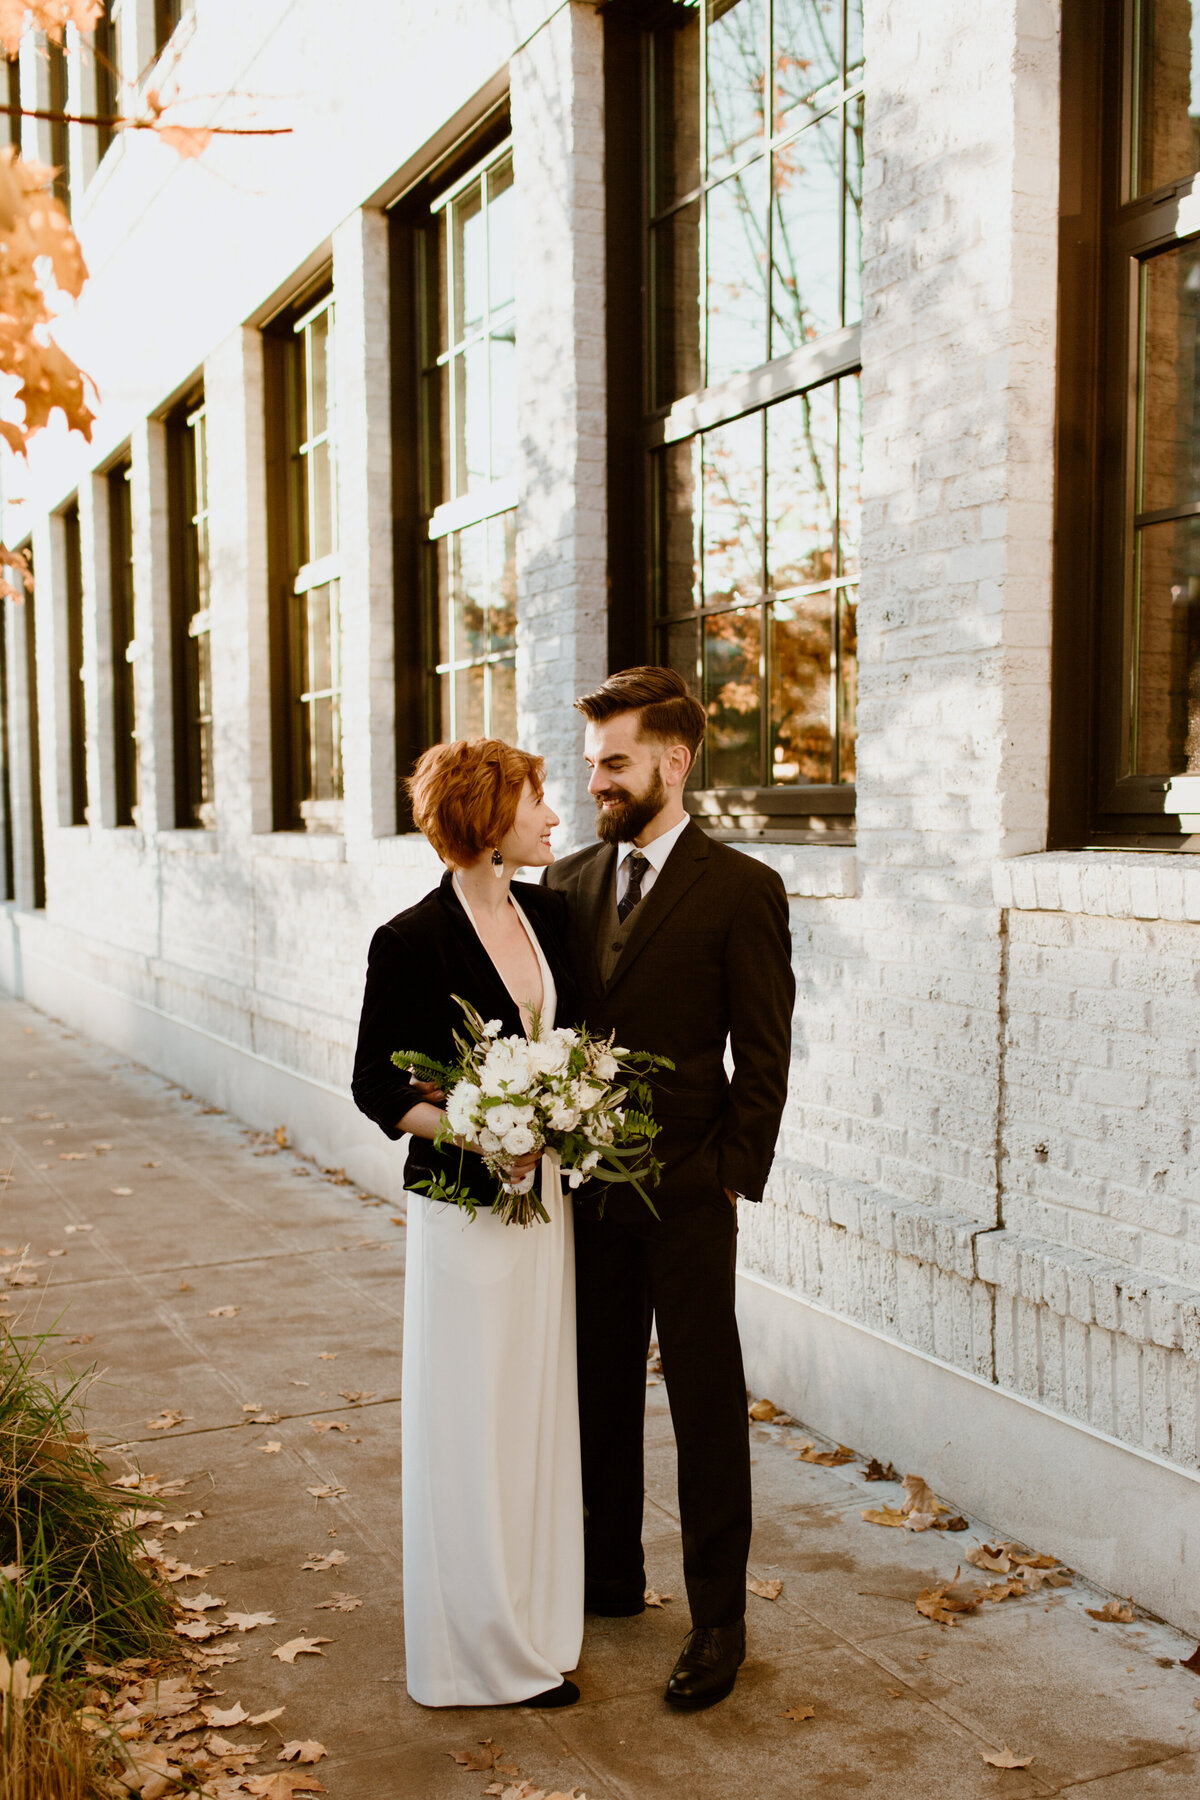 An urban sunset candid of a couple in wedding attire captured by Fort Worth wedding photographer, Megan Christine Studio